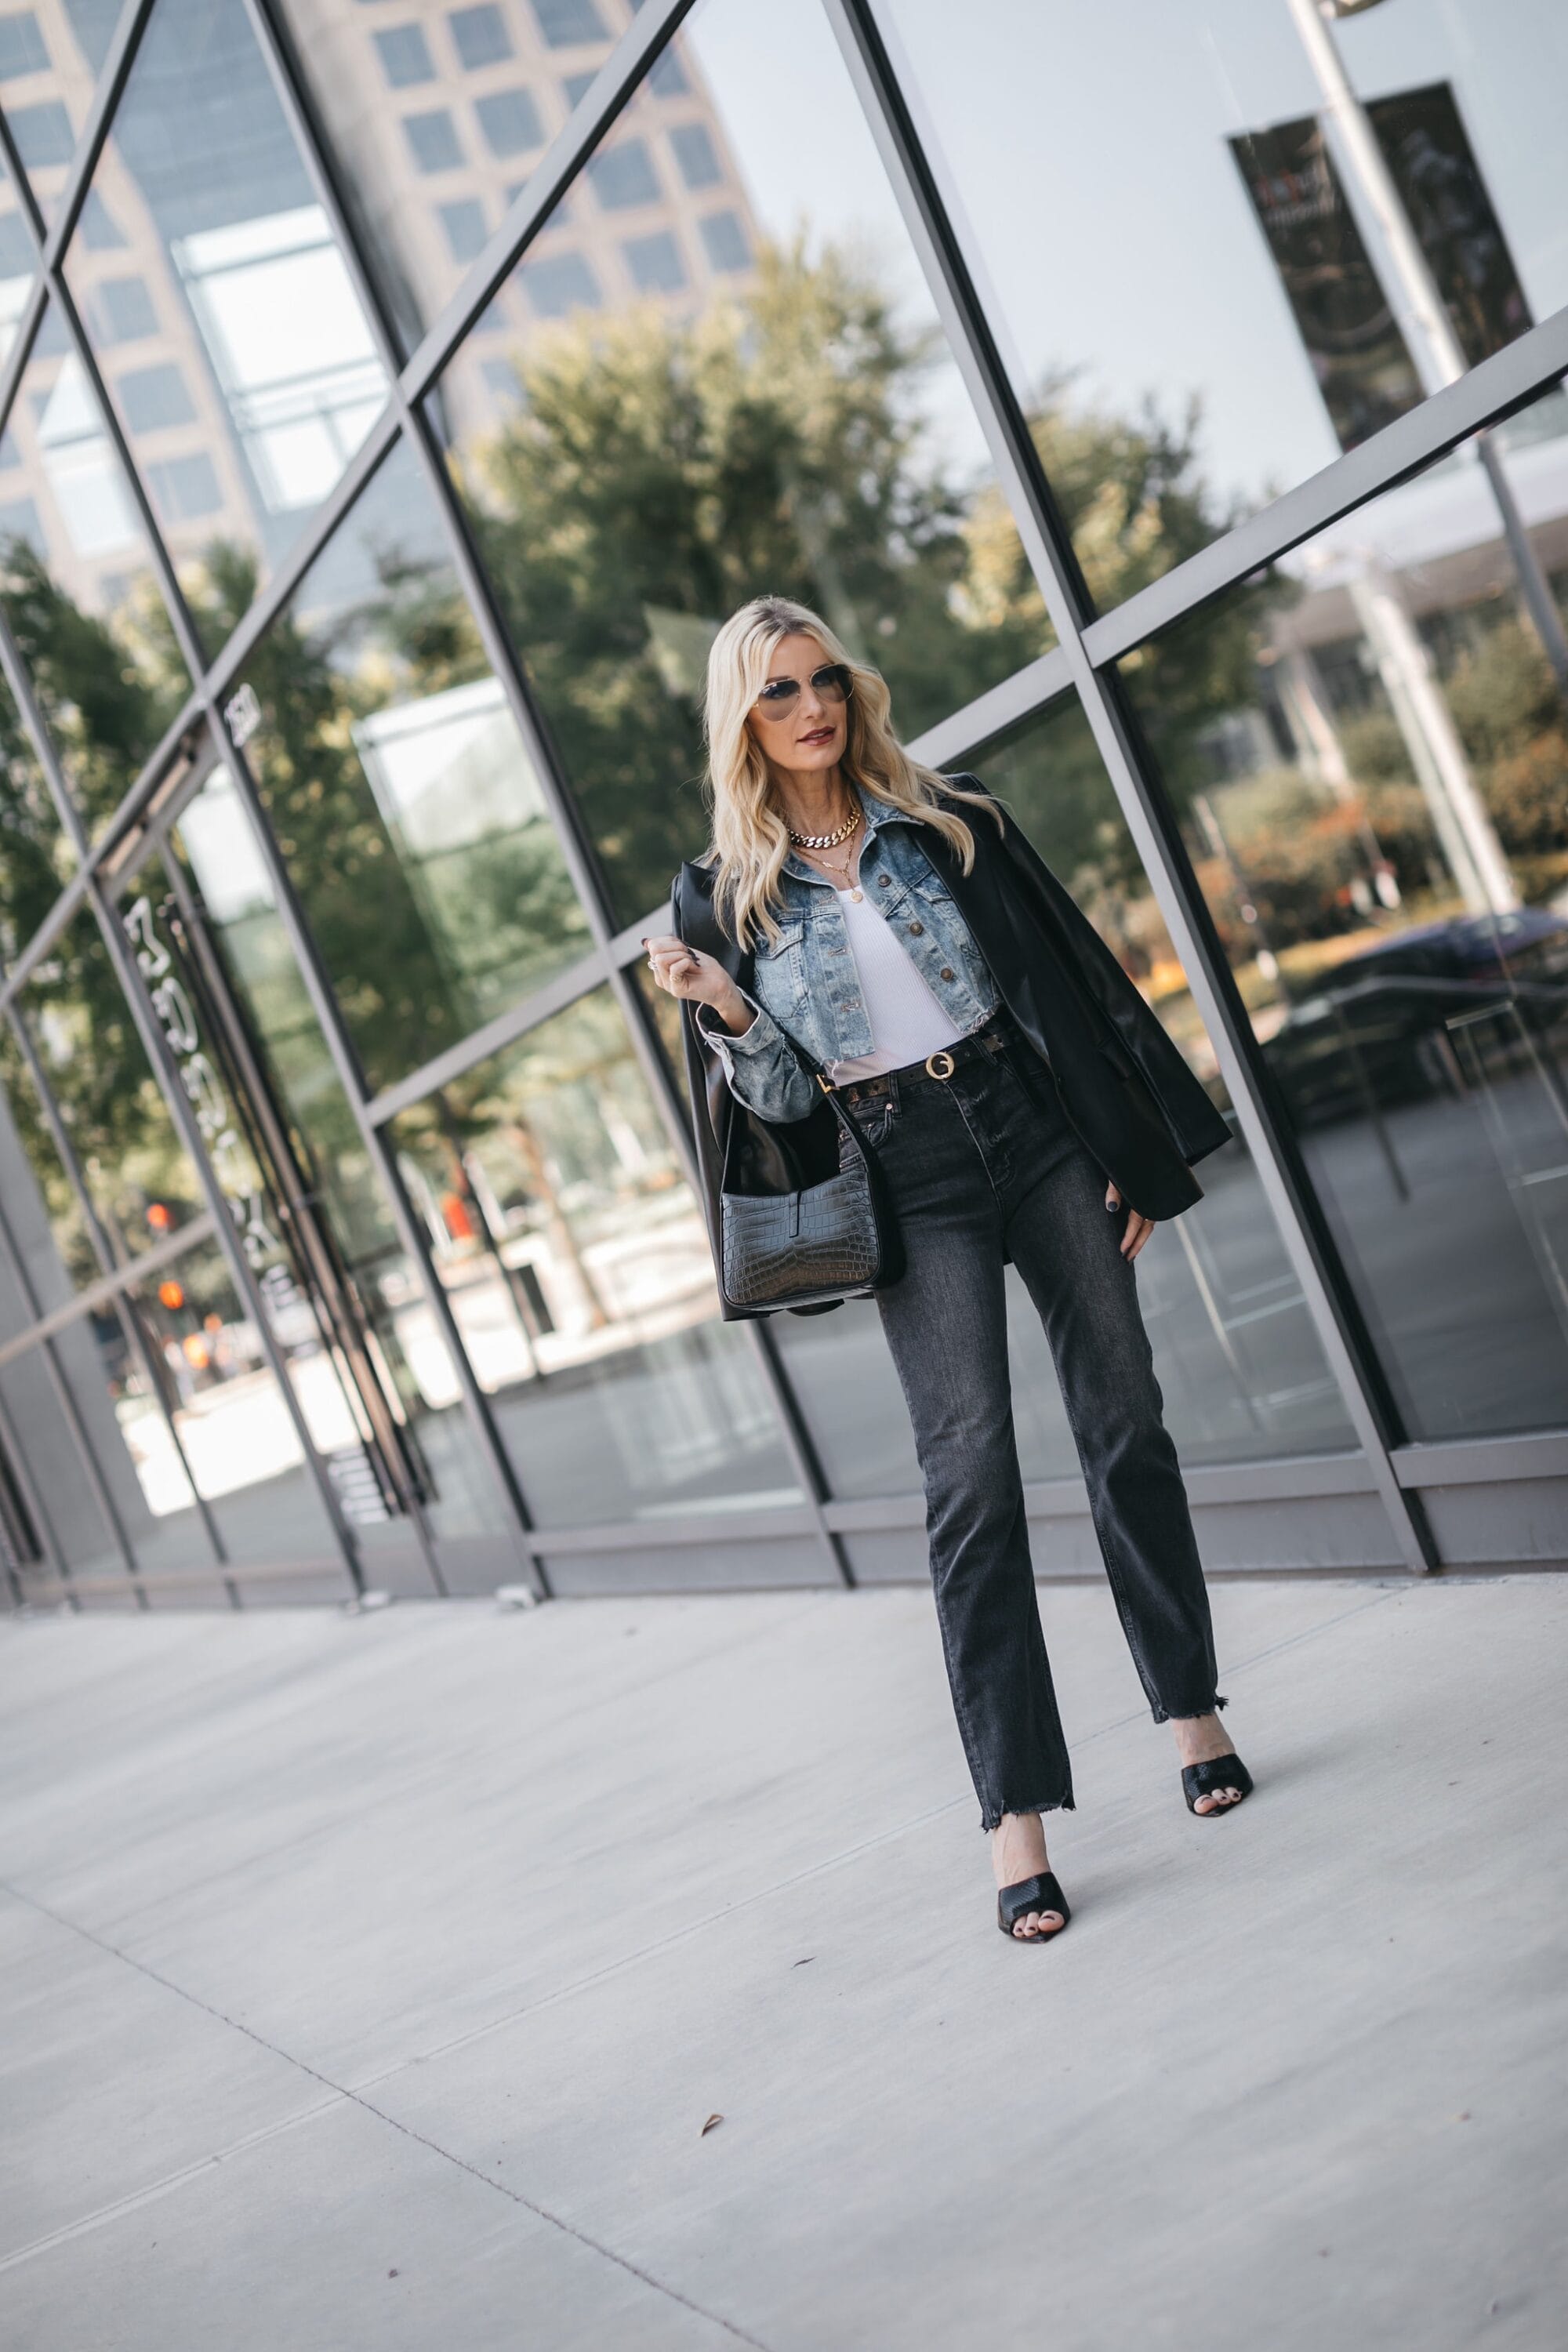 Dallas fashion influencer wearing Alice & Olivia blazer over free people denim jacket as one of 5 fall layering tips.